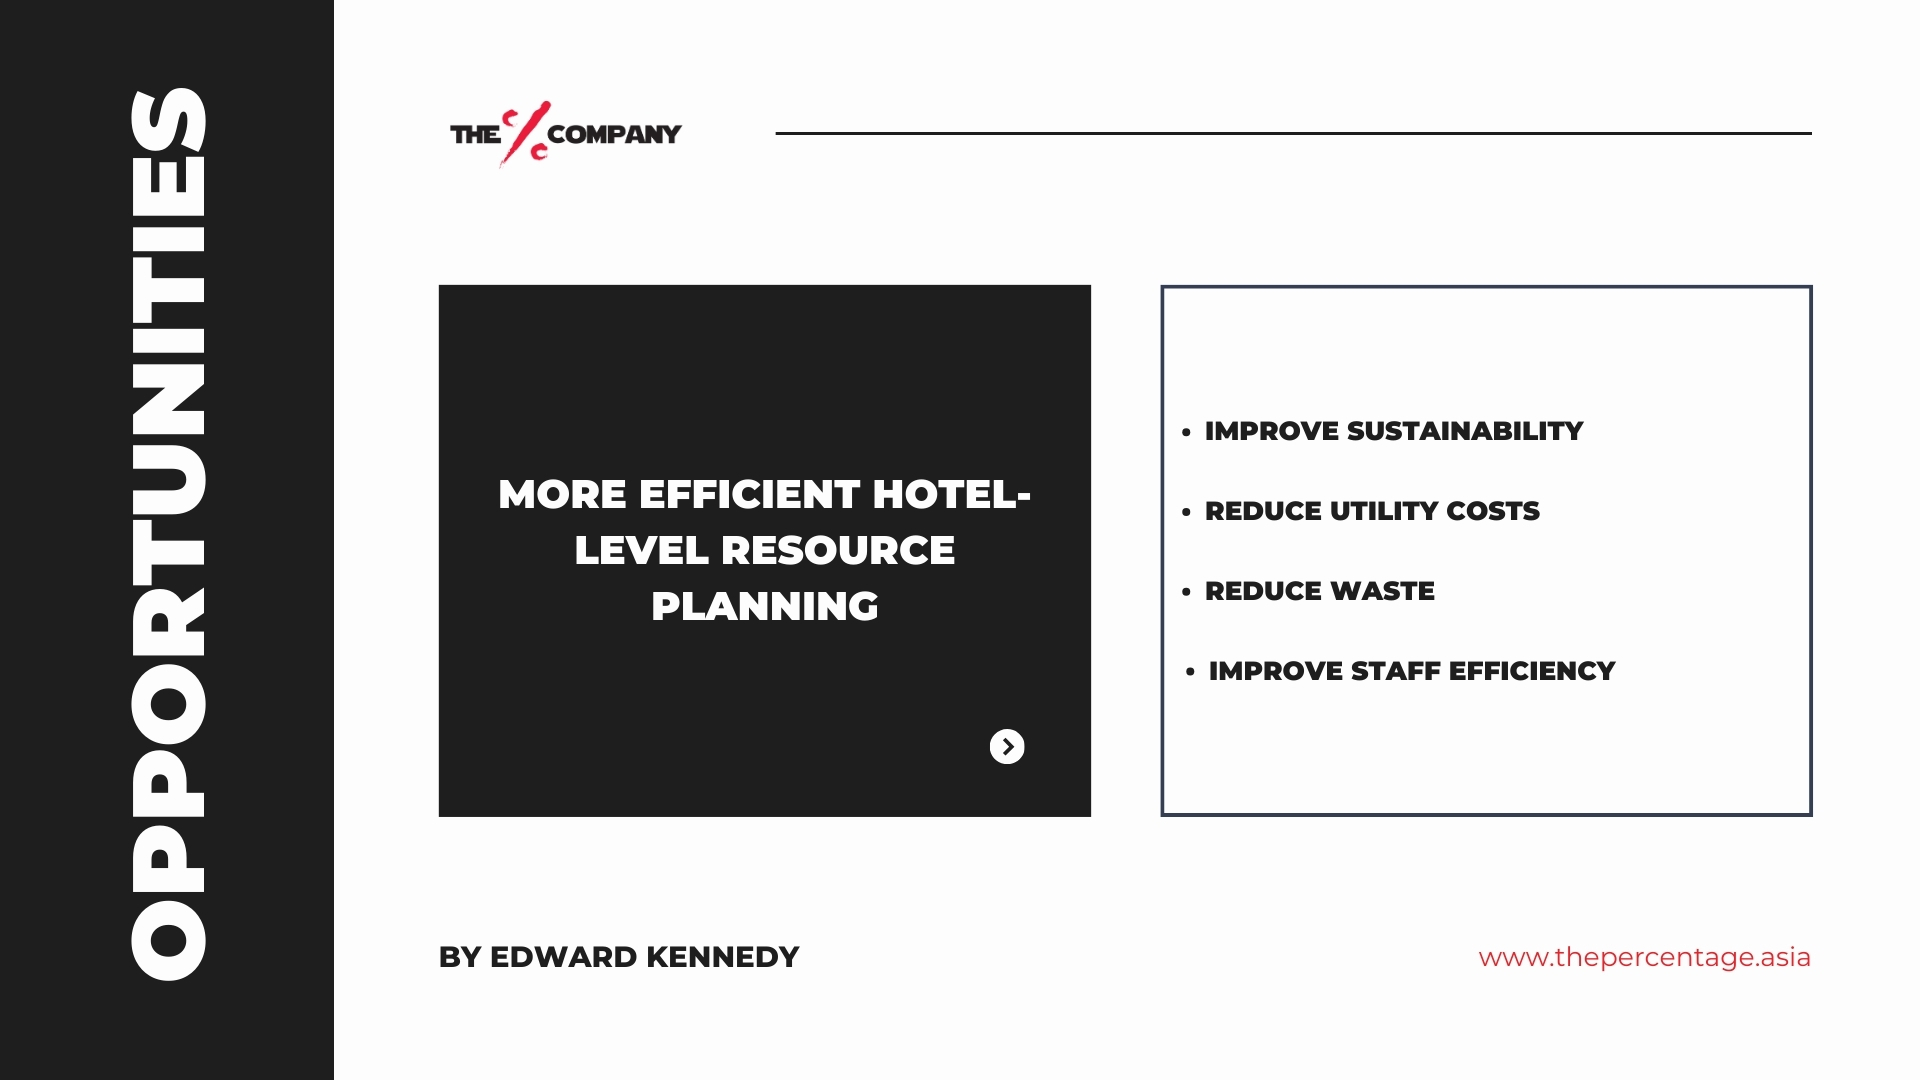 AI Opportunity 3: Allow more efficient Hotel-level Resource planning